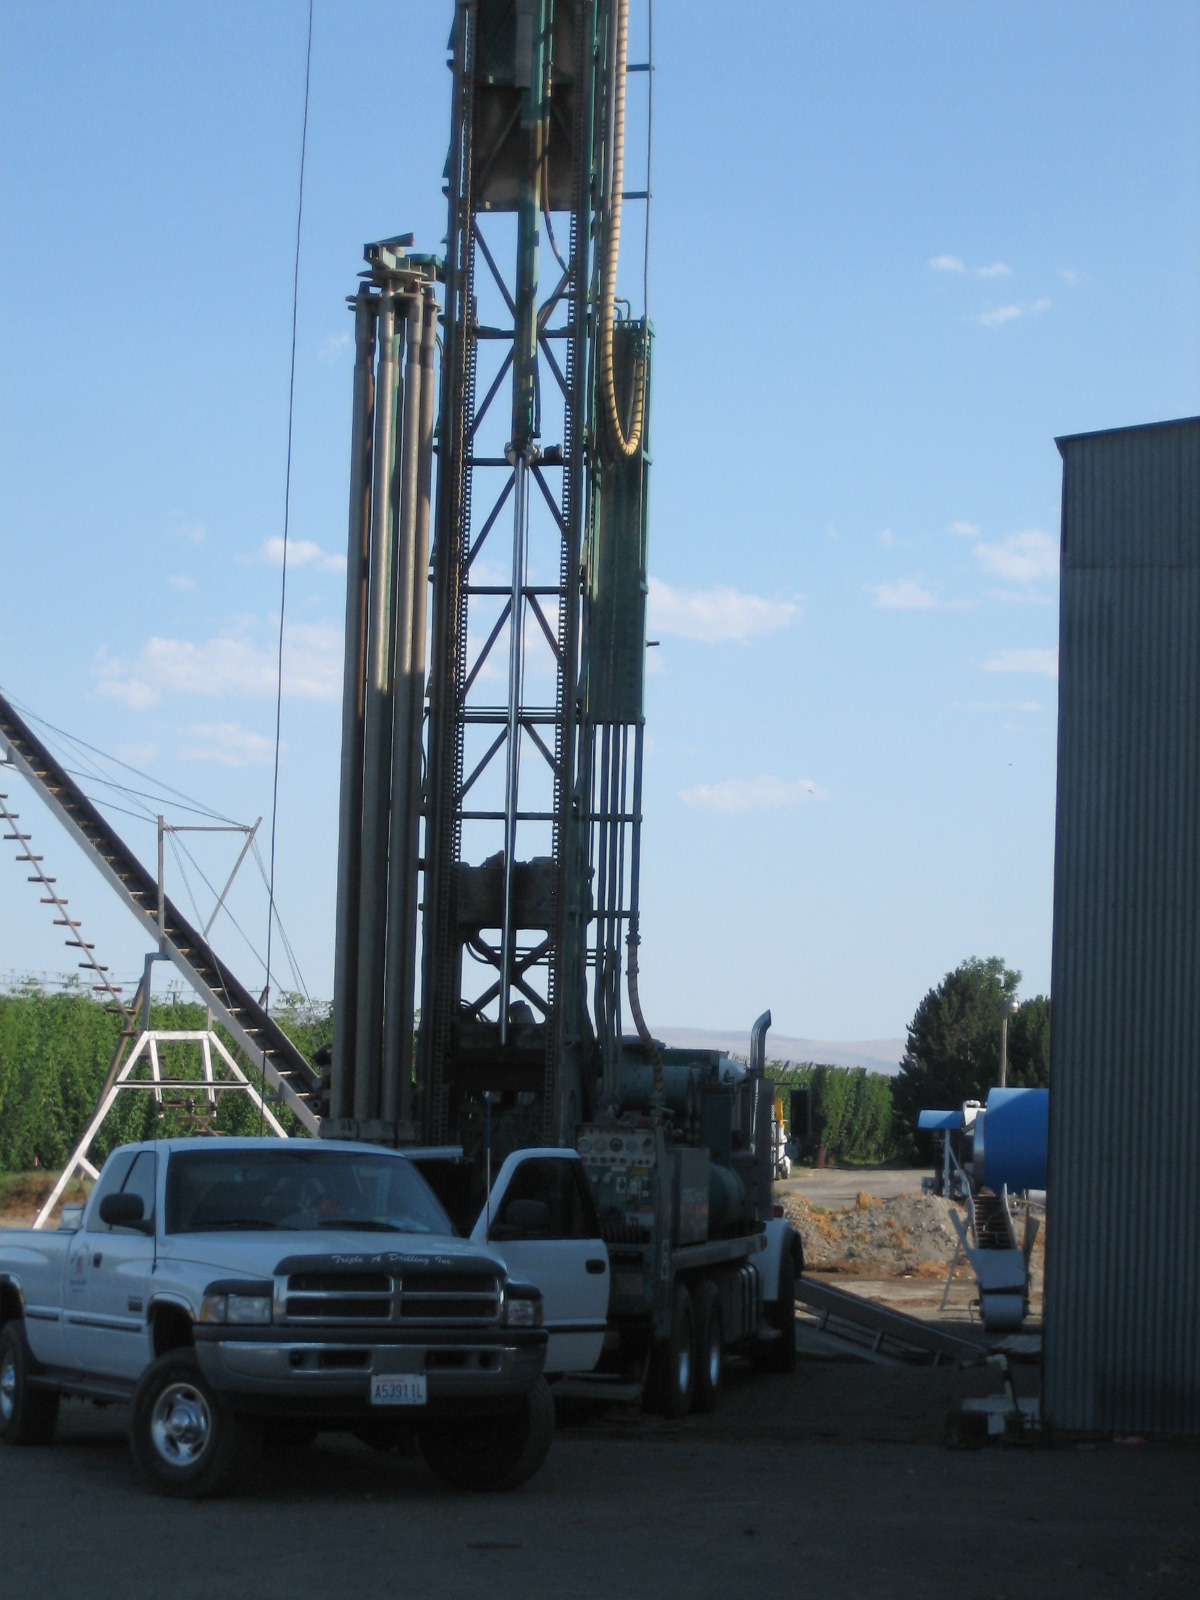 [Drilling+a+new+well+July+16,+2008.jpg]